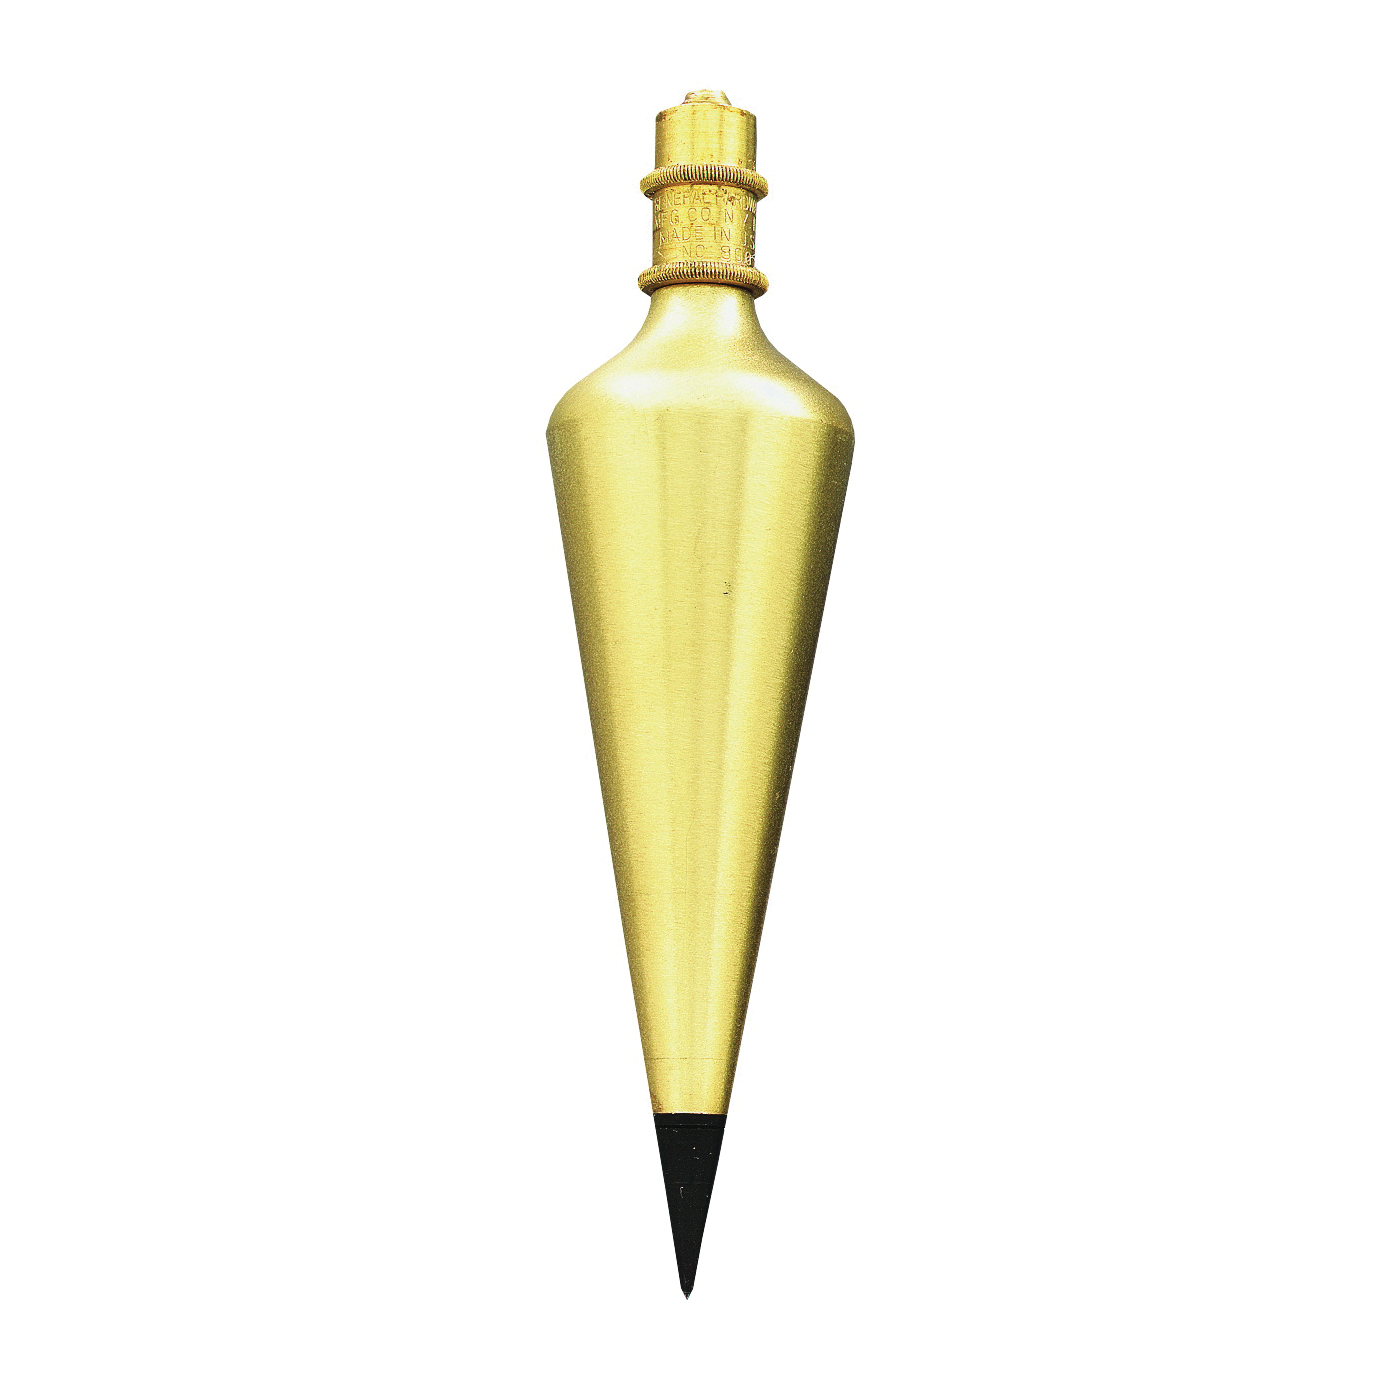 800-16 Plumb Bob, Solid Brass, Lacquered